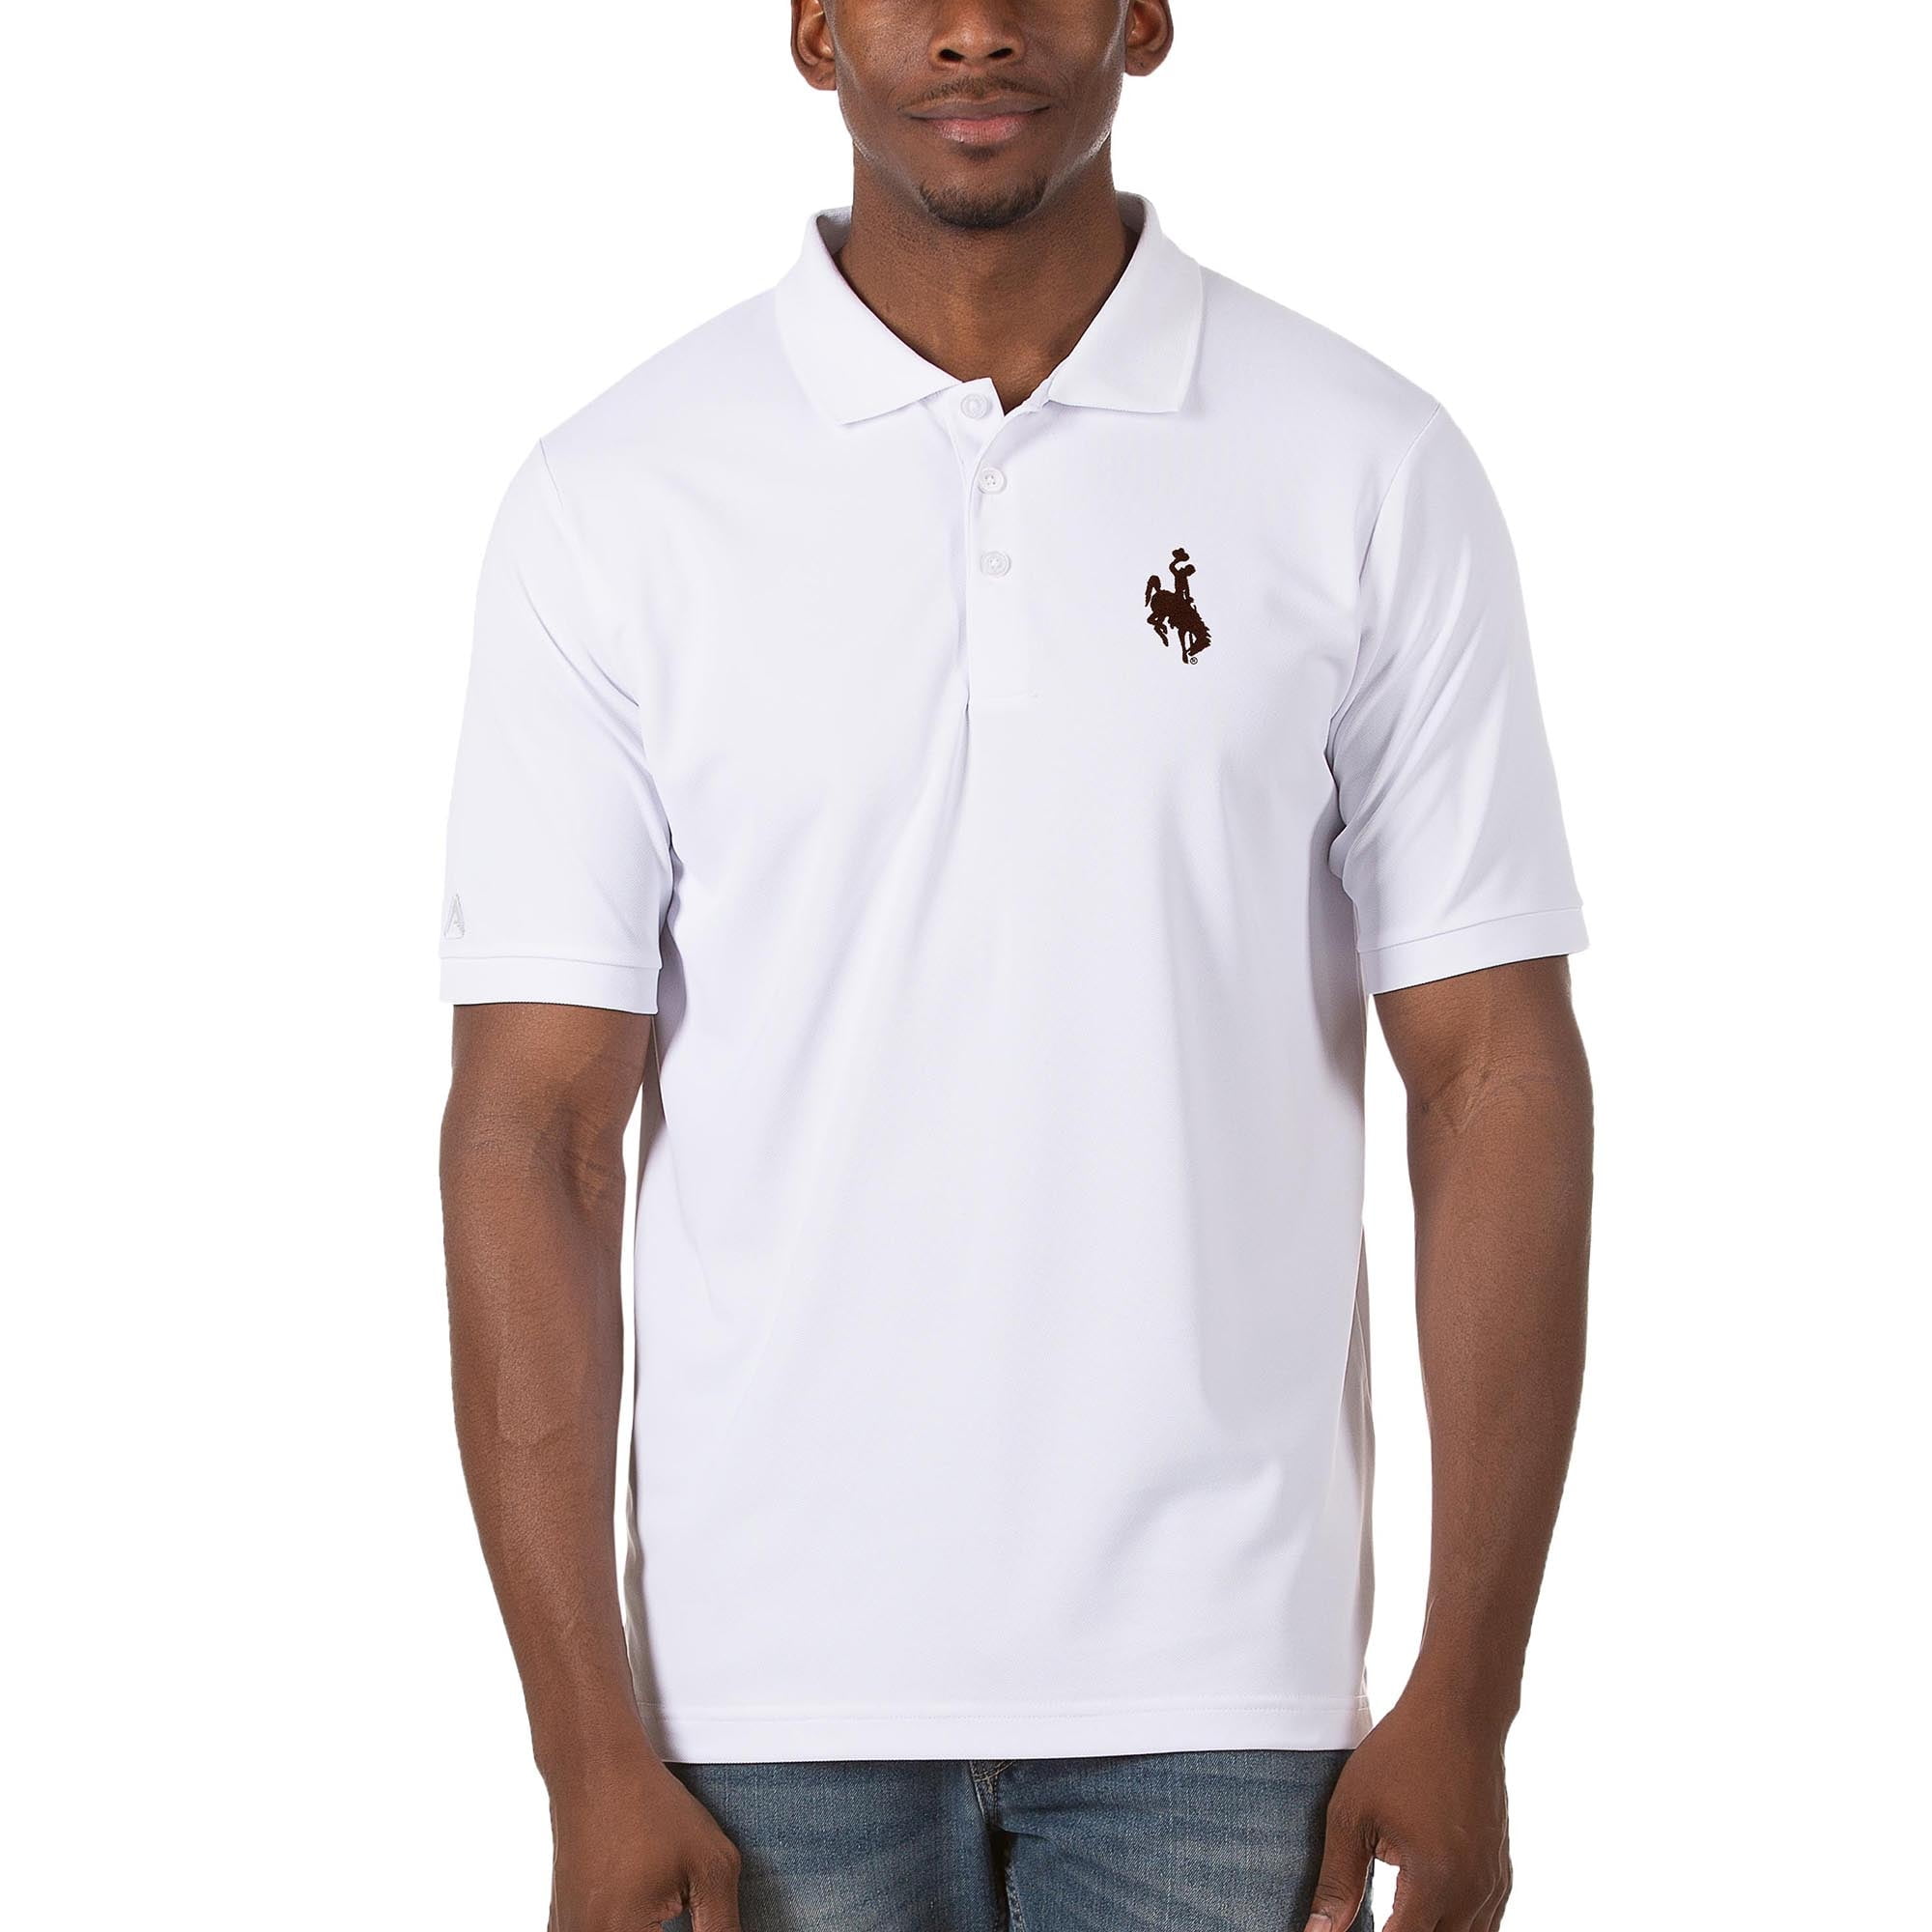 WY Wings polo